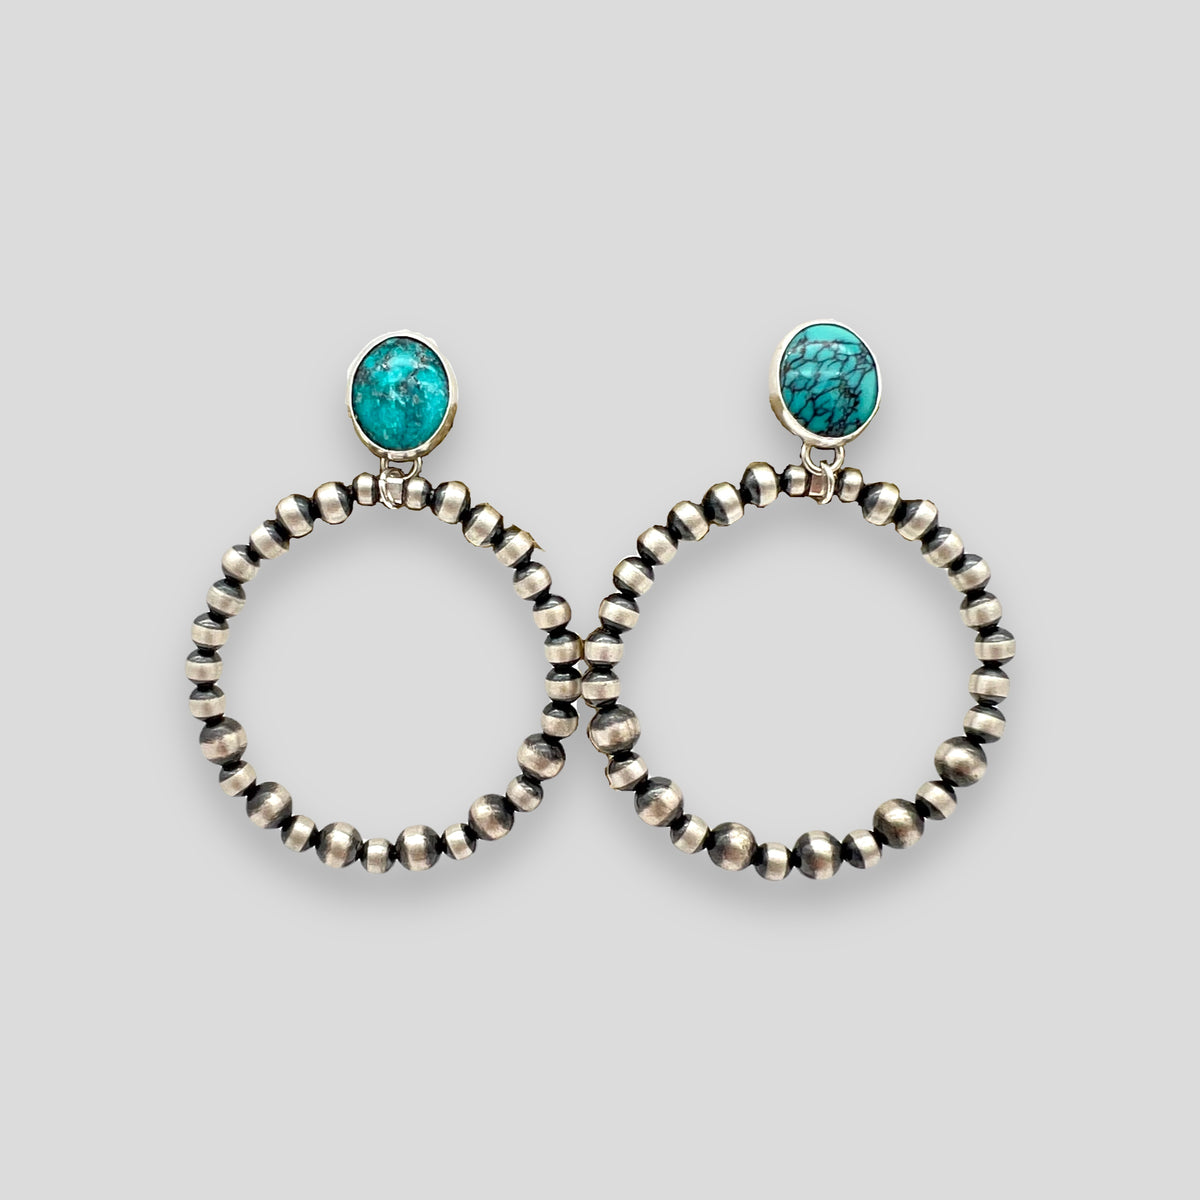 Navajo Handcrafted Turquoise and Navajo Pearls Hoops